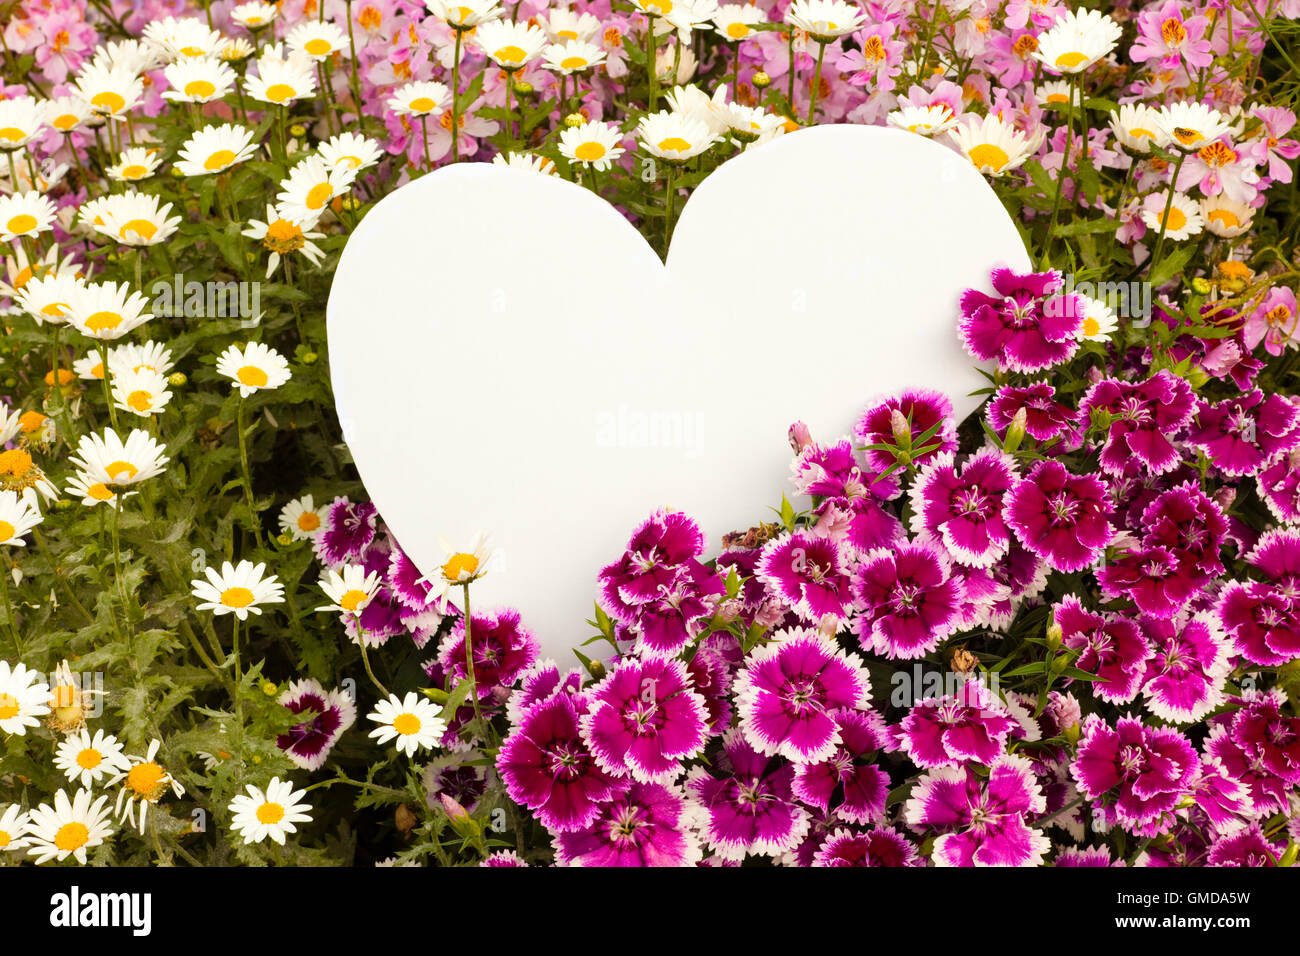 Flower greetings from heart Stock Photo